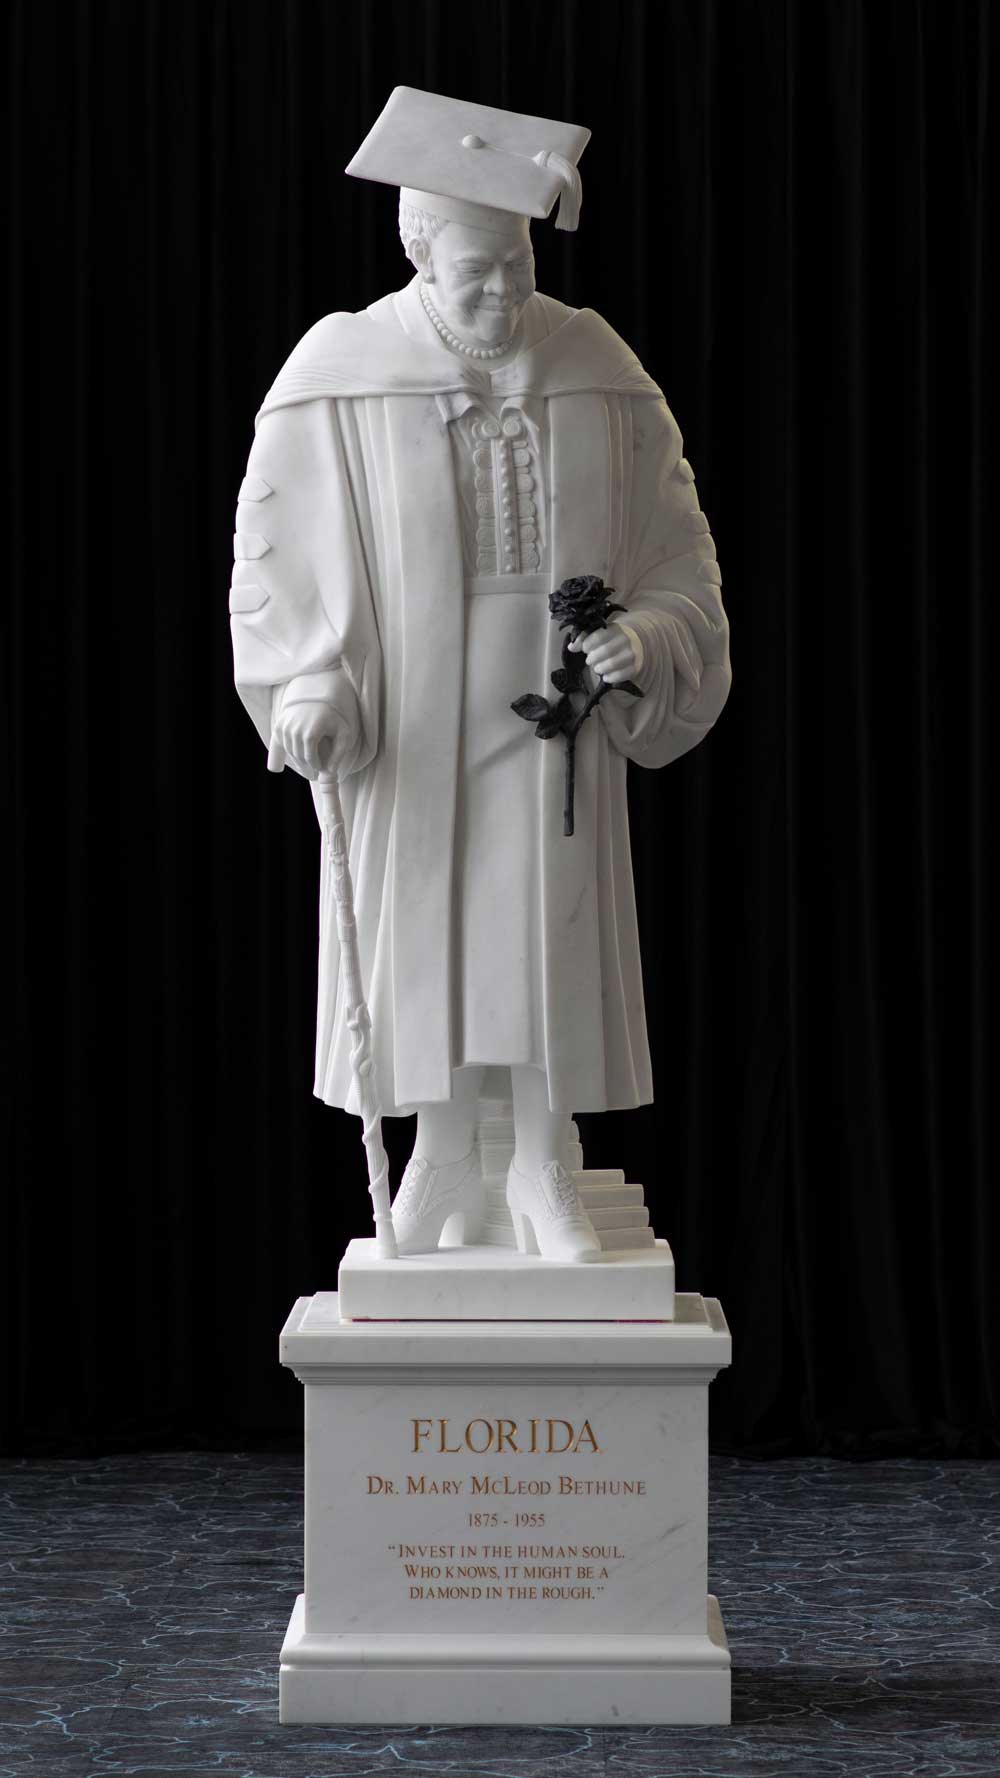 The statue of Mary McLeod Bethune to be unveiled Wednesday. (B-CU)